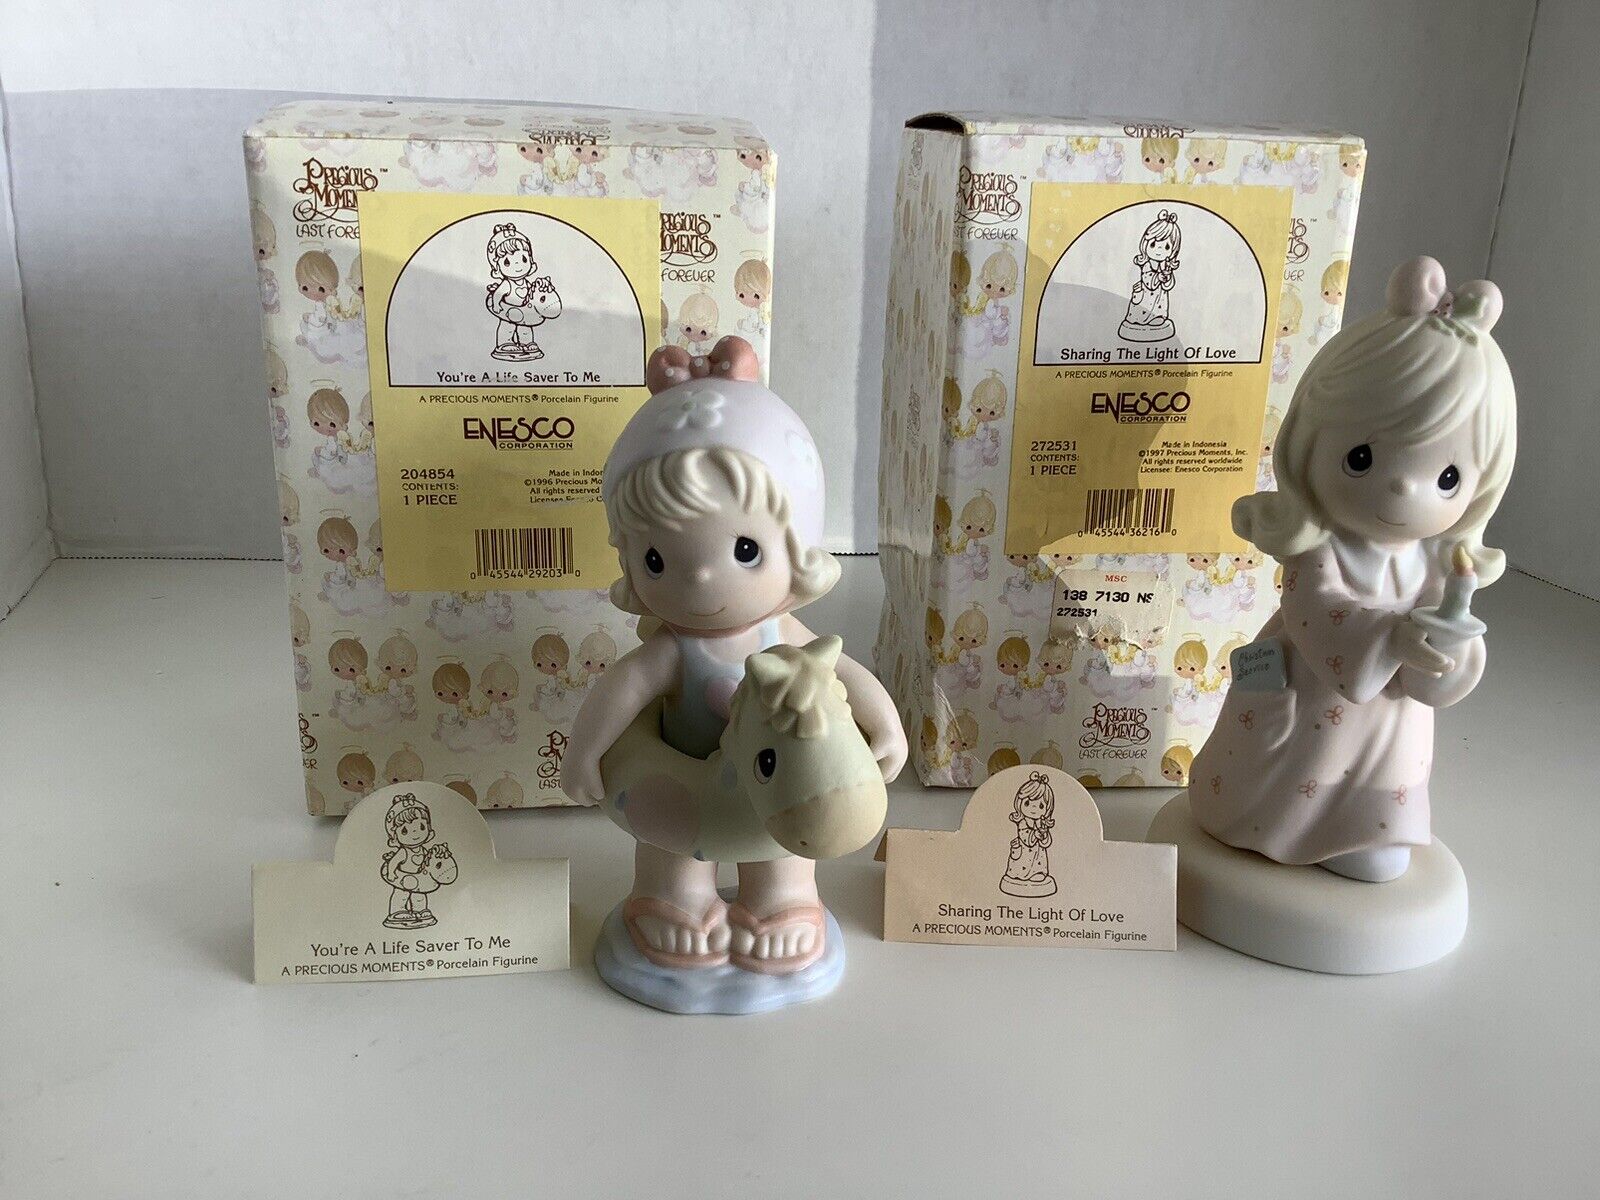 Lot Of 2 Precious Moments Figures 204854 And 272531 Sharing The Light Of Love